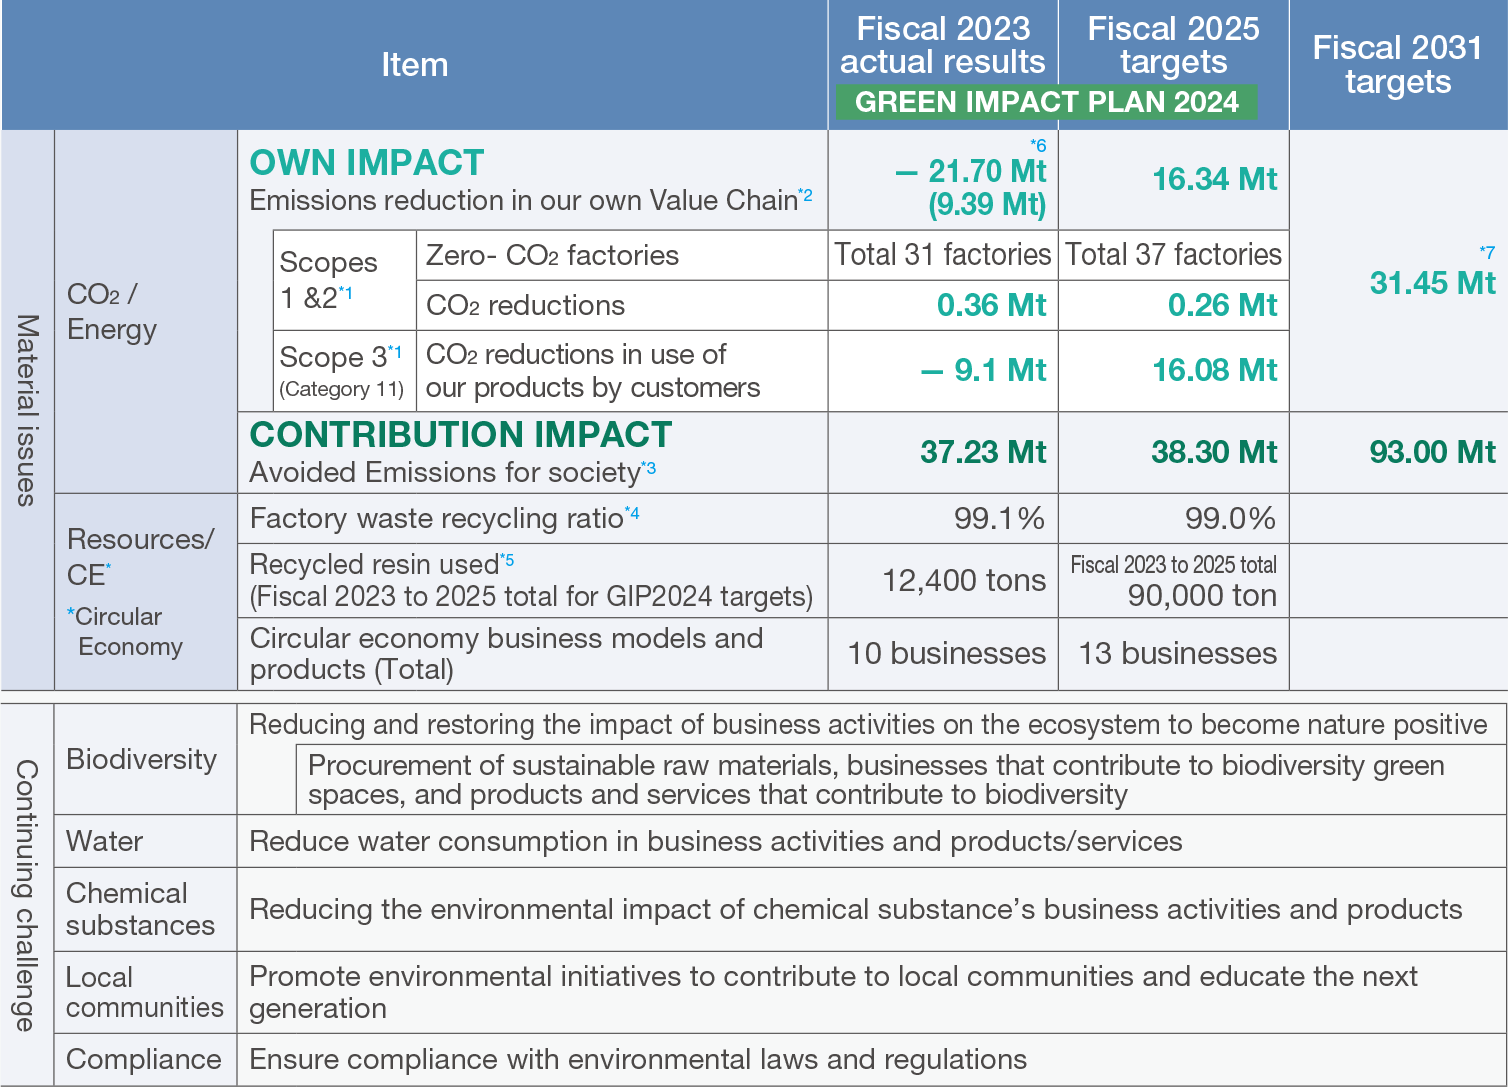 GREEN IMPACT PLAN Fiscal 2025, 2031 targets and 2023 actual results